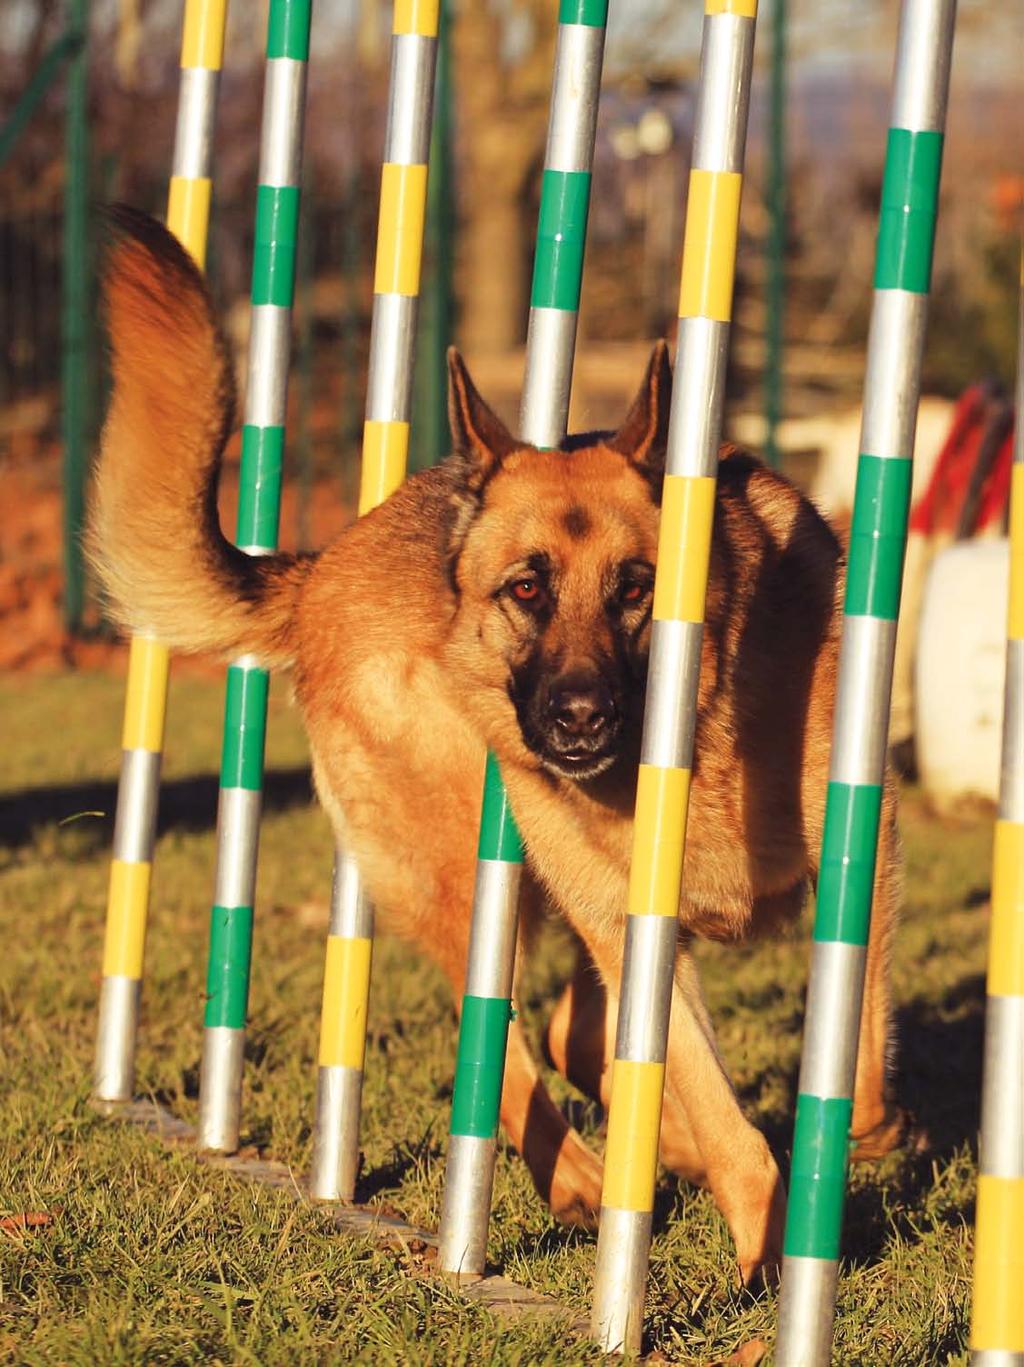 German Shepherds participate in many